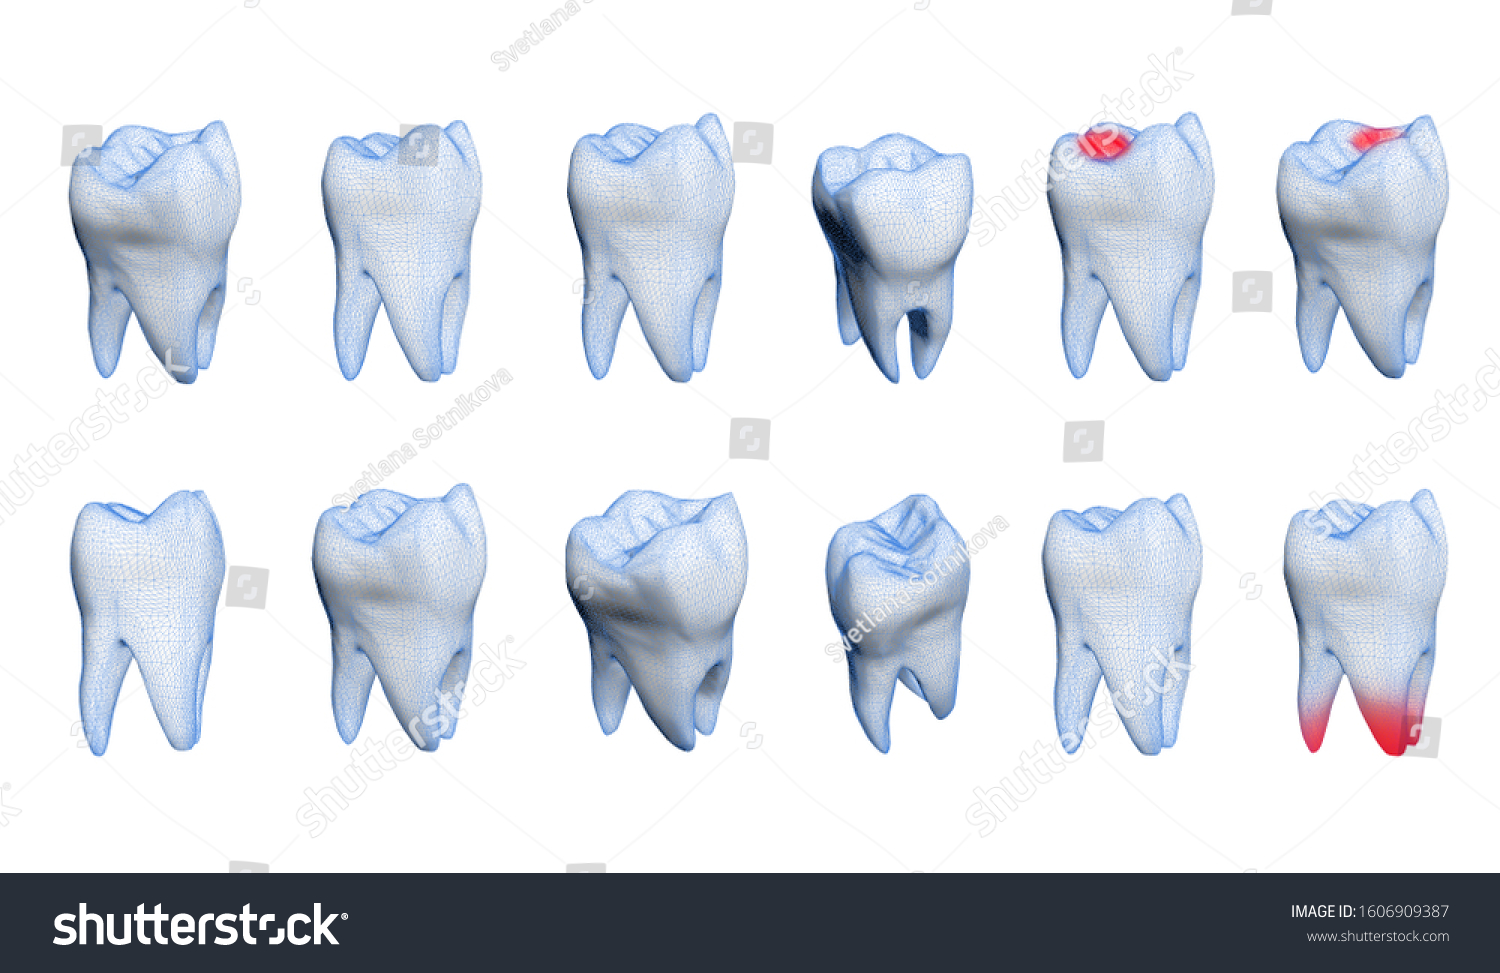 Human healthy and bad tooth 
on a white background. 3d model. #1606909387